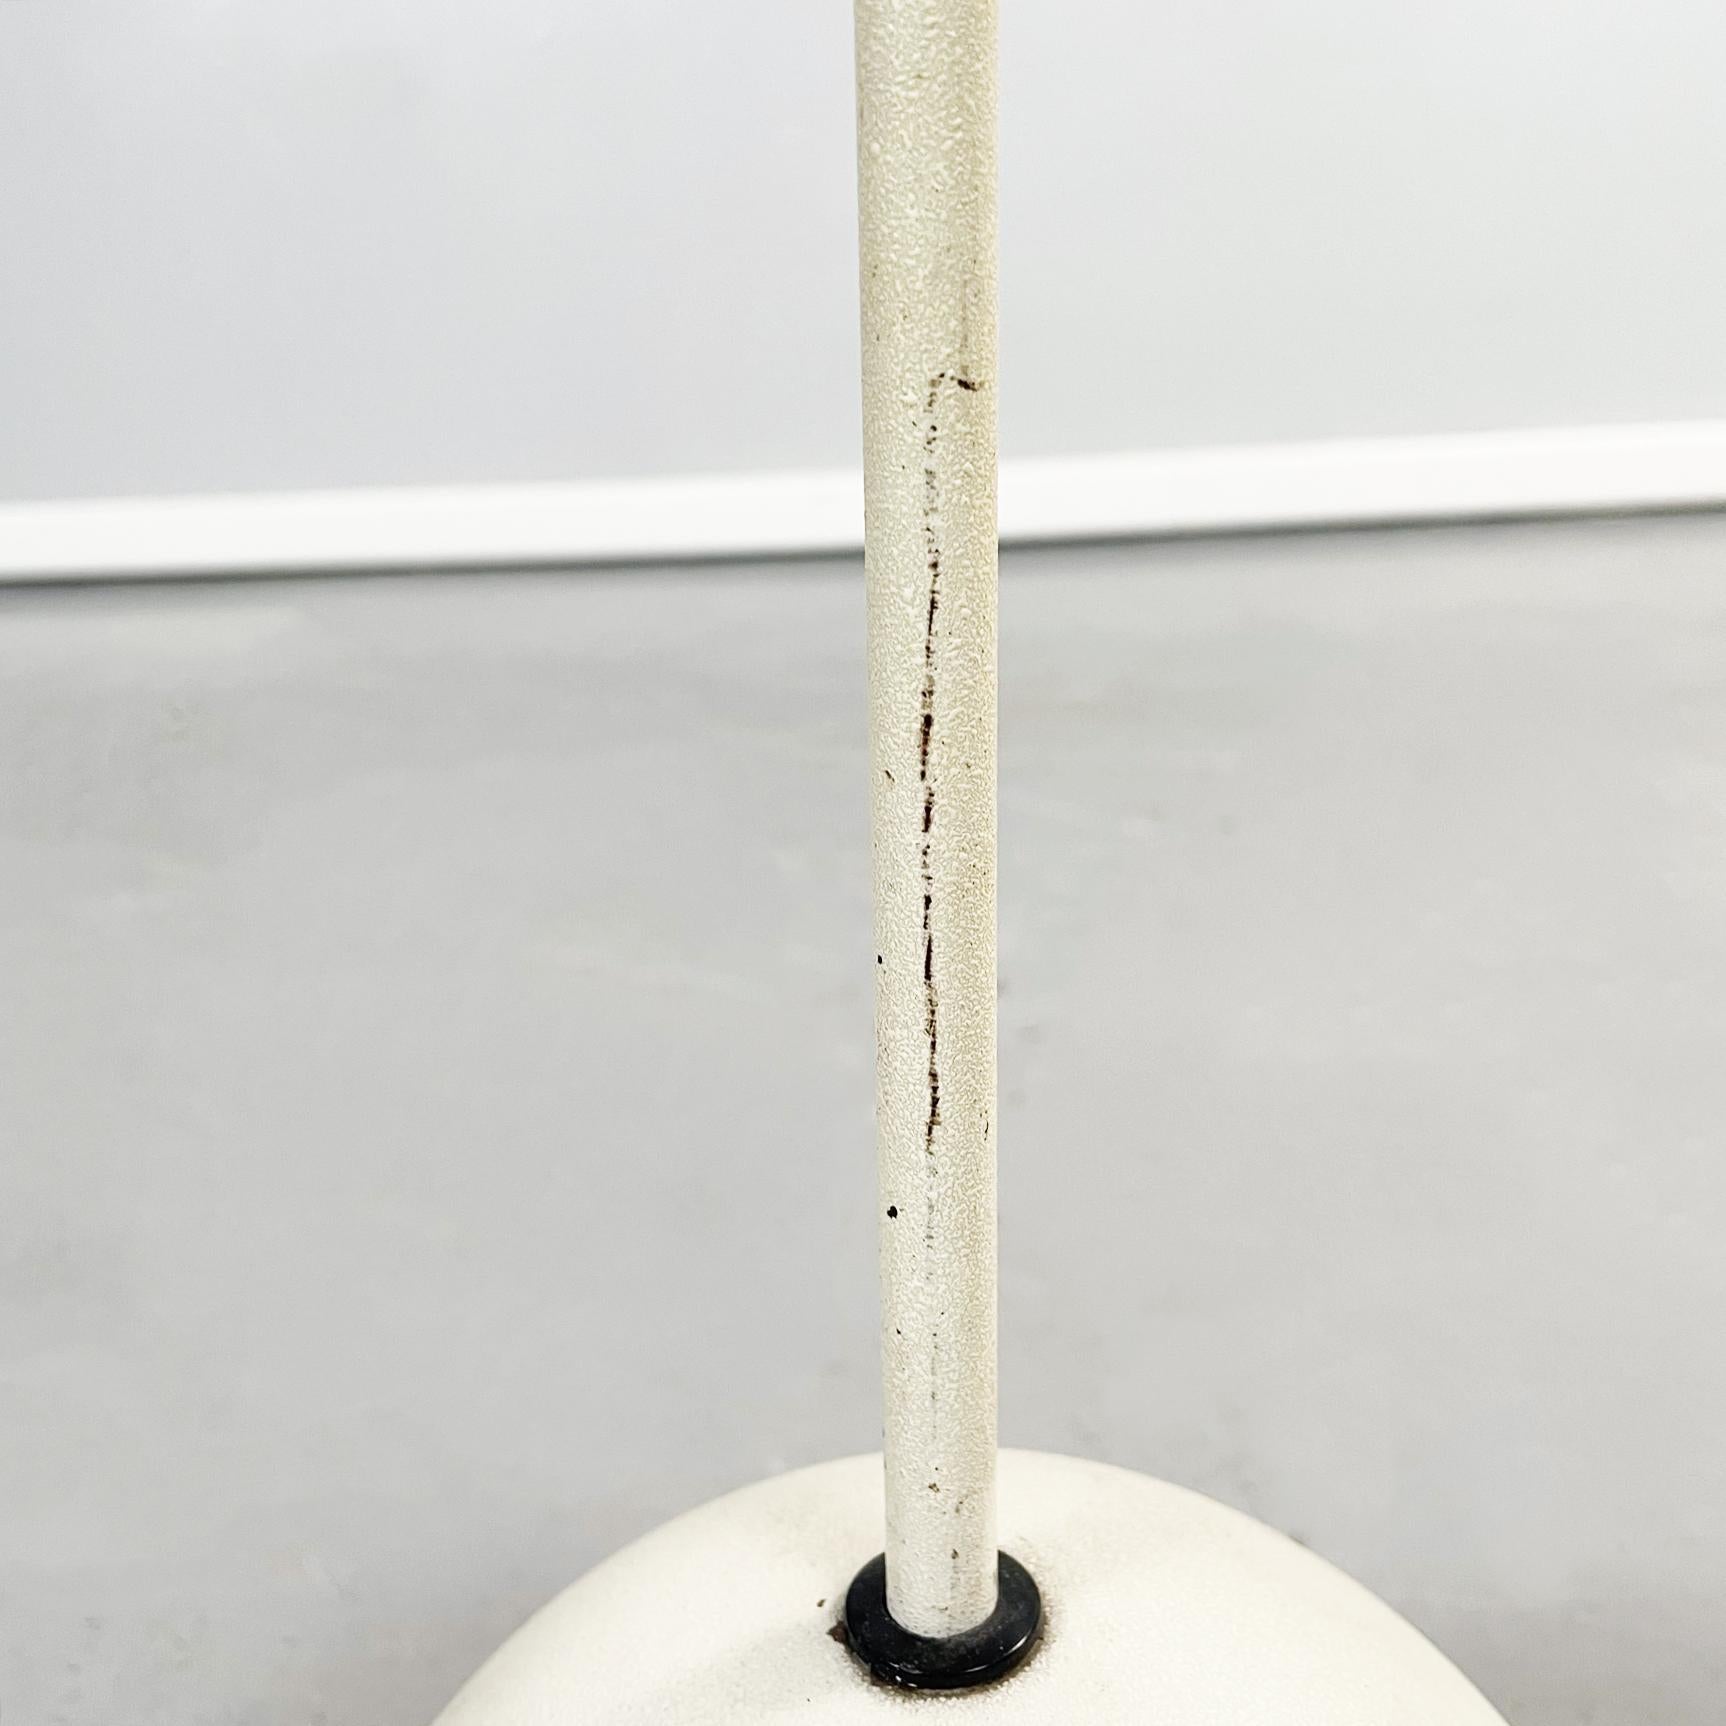 Italian Mid-Century Modern Floor Lamp in White Fabric and Metal, 1980s For Sale 5